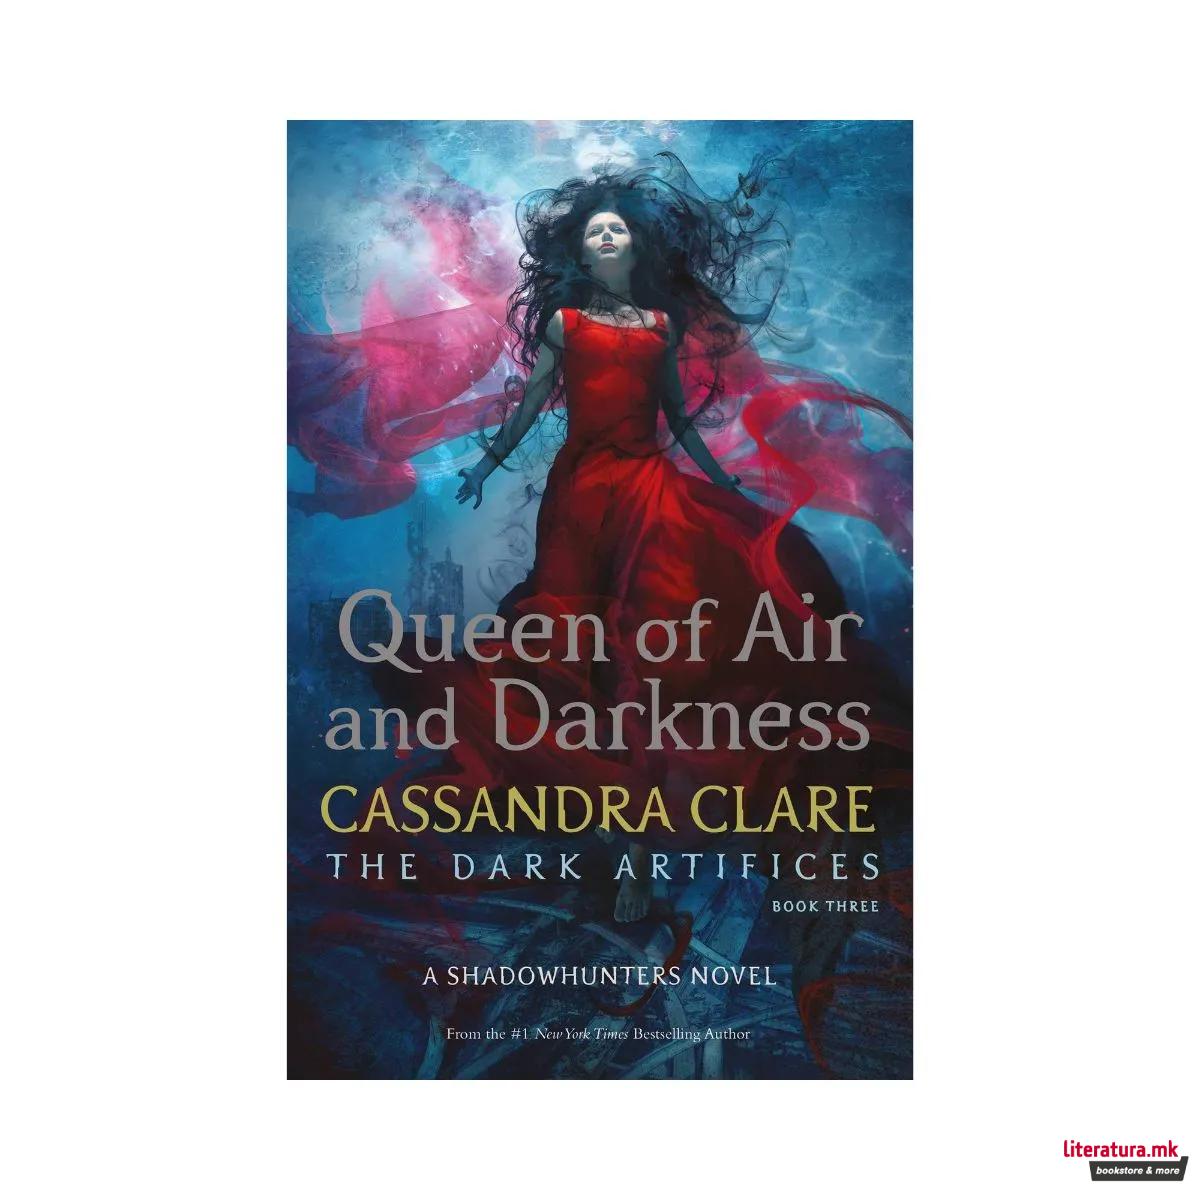 Queen of Air and Darkness (The Dark Artifices Book 3) 